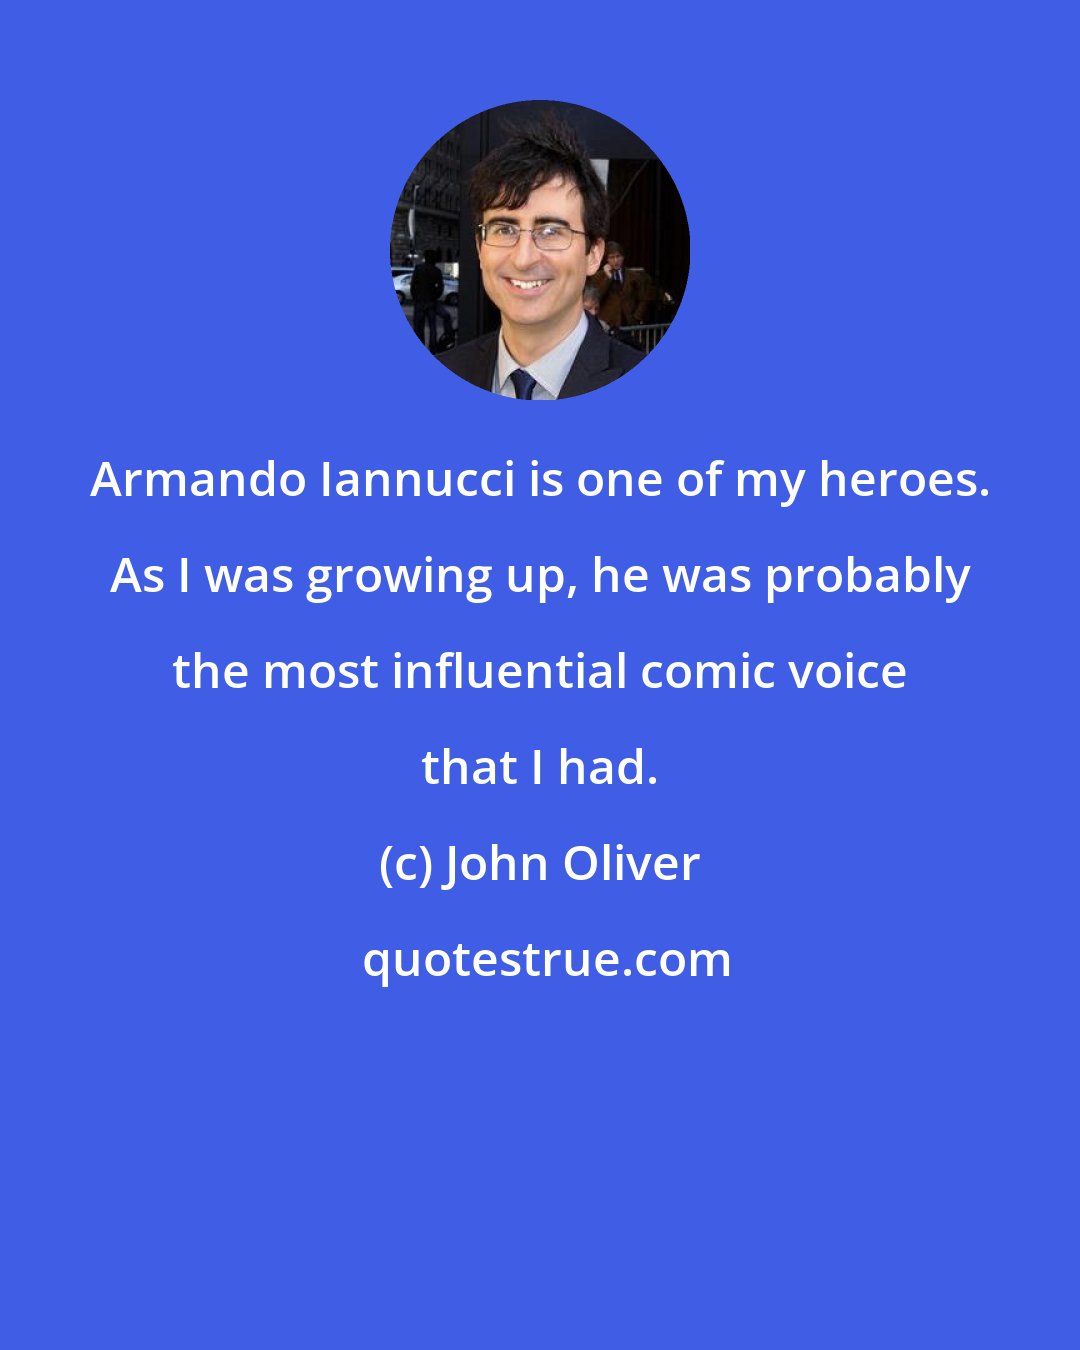 John Oliver: Armando Iannucci is one of my heroes. As I was growing up, he was probably the most influential comic voice that I had.